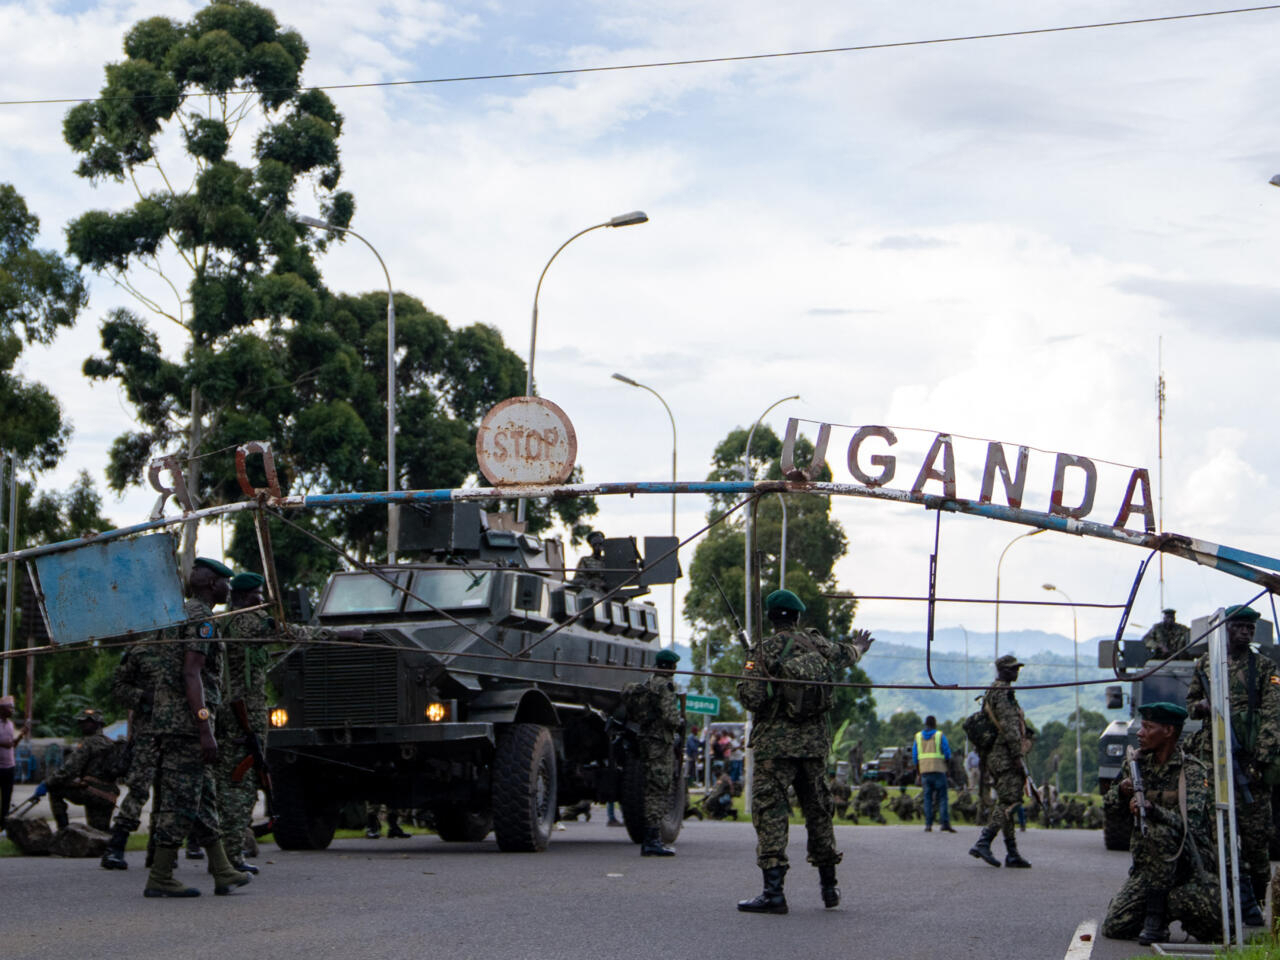 Members of the Uganda Peoples' Defence Forces (UPDF) position themselves on the Ugandan side of the border town in Bunagana, Democratic Republic of Congo, while awaiting deployment